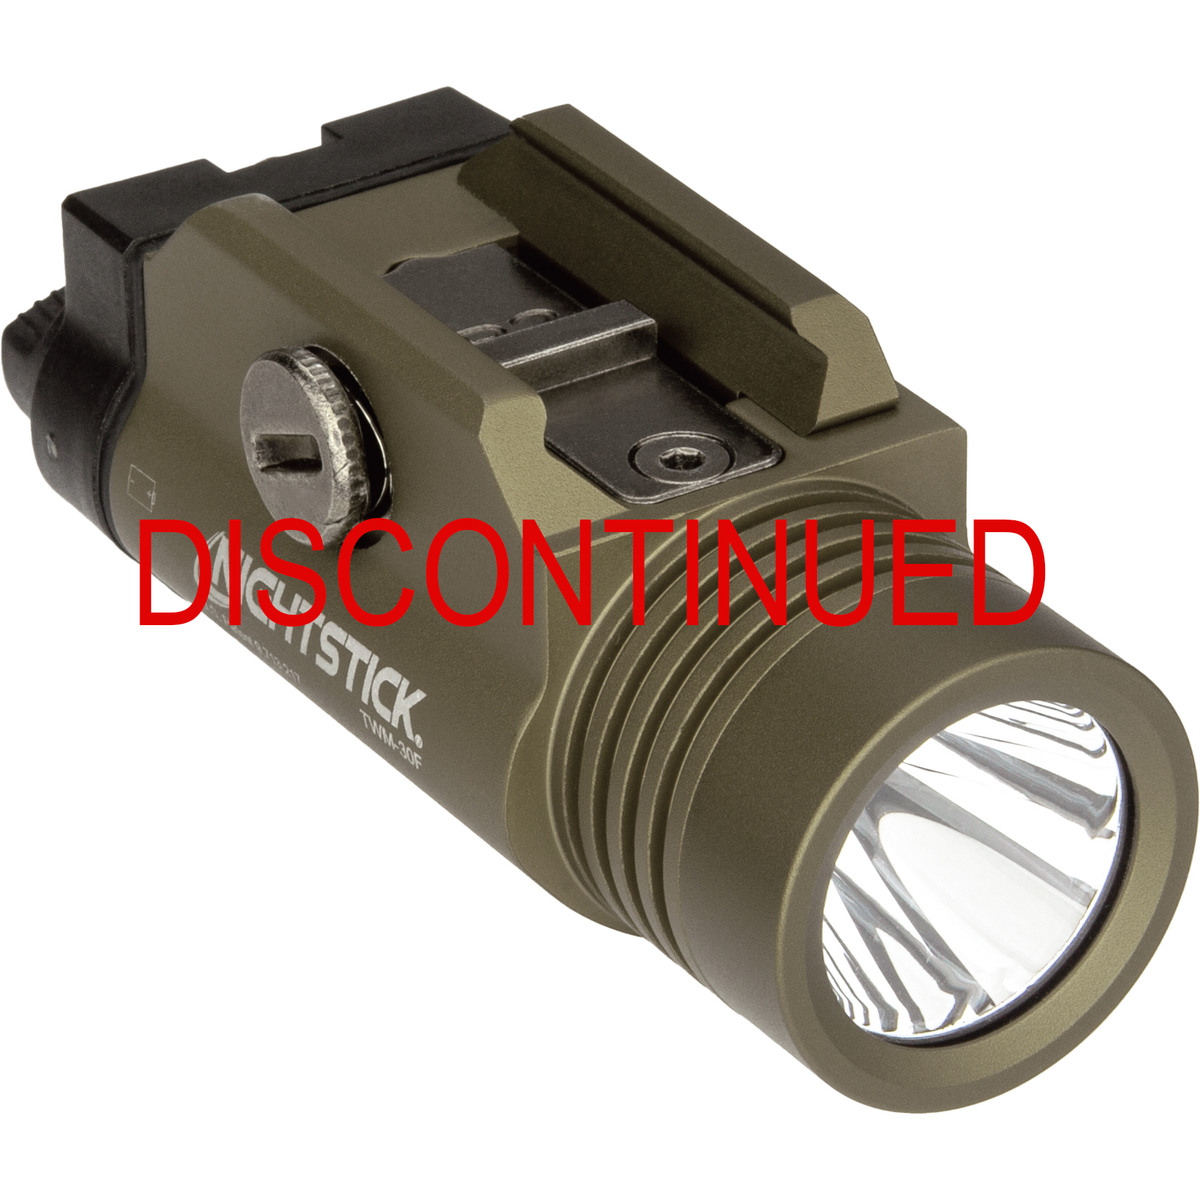 TWM-30F: OD Green Tactical Weapon-Mounted Light – Nigh